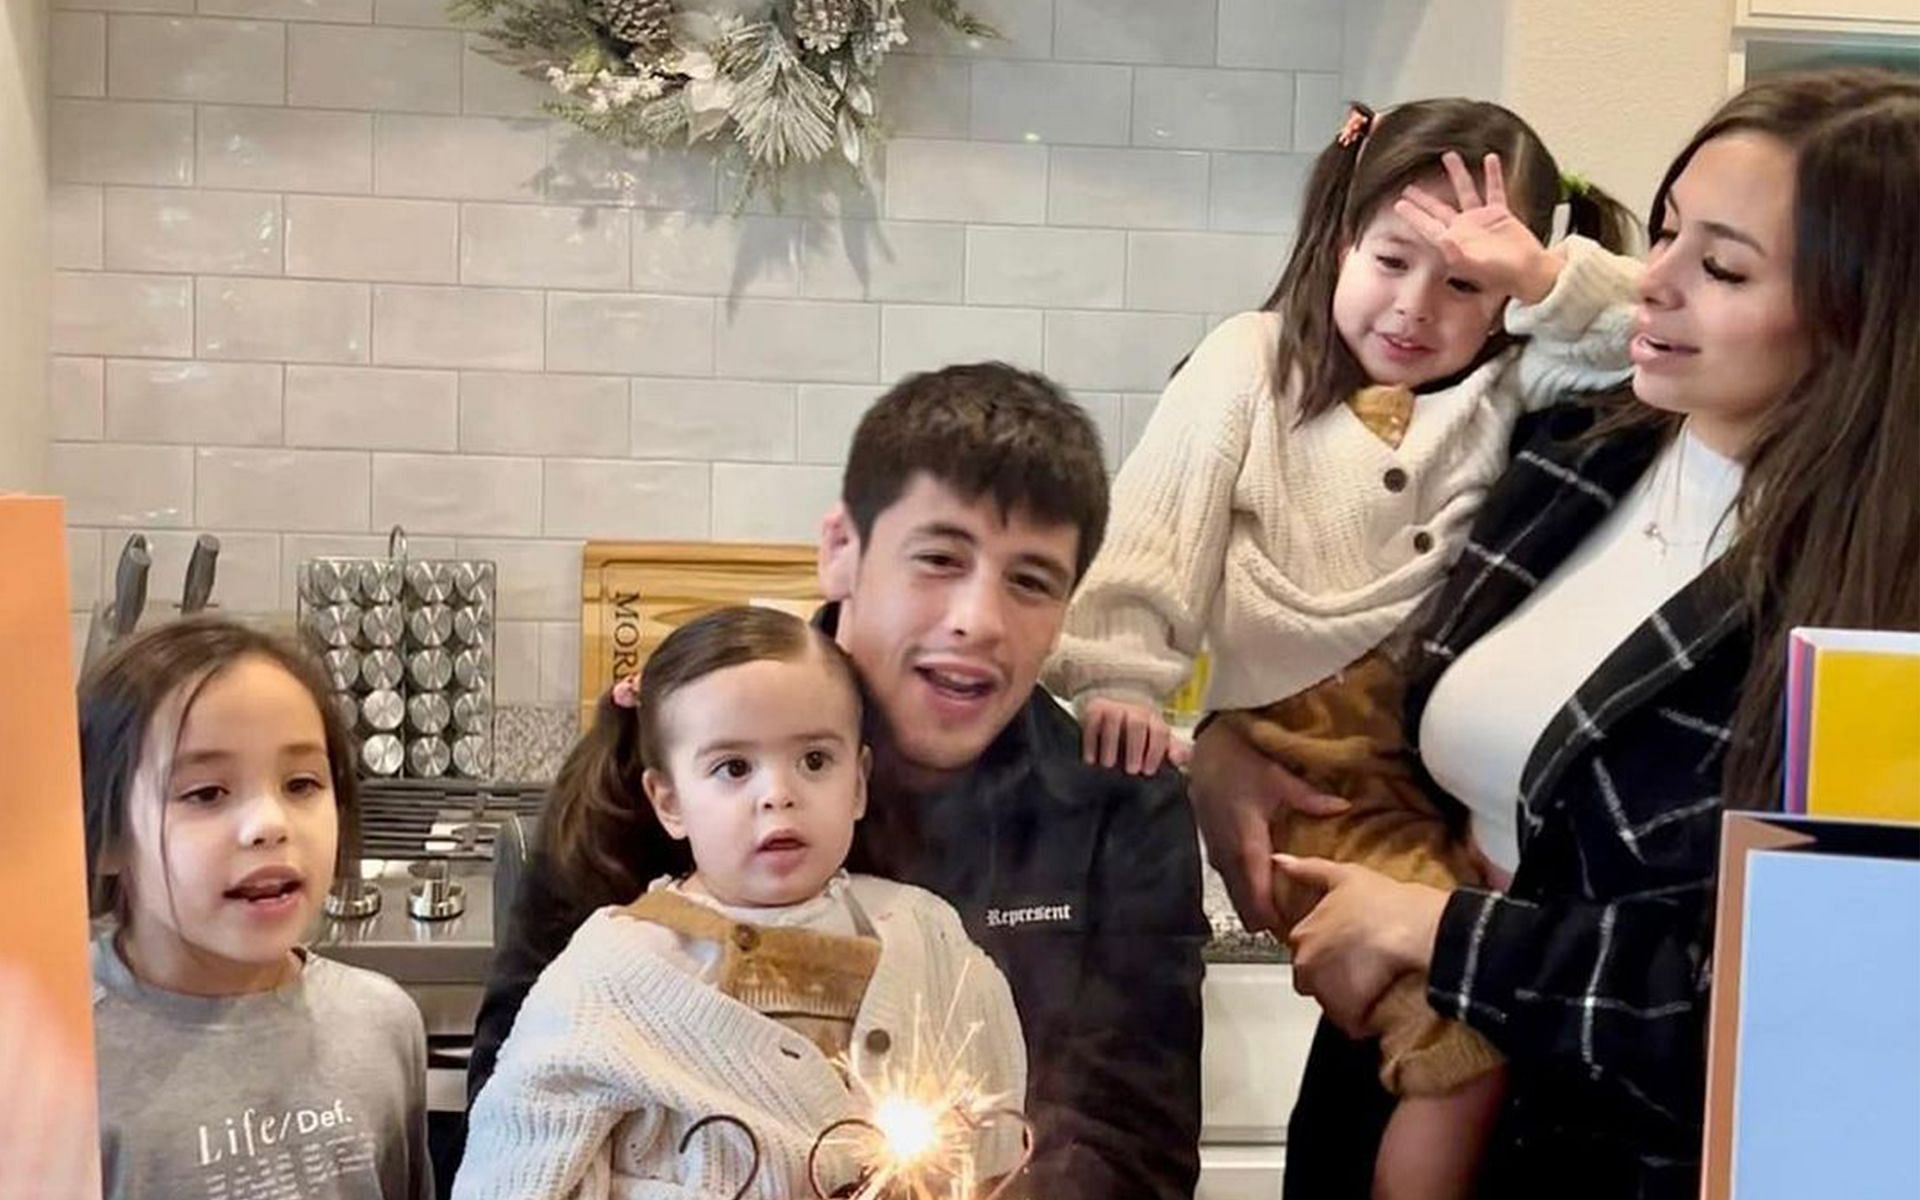 Brandon Moreno enjoys a stable family life with wife and three daughters [Image Courtesy: @theassasinbaby Instagram]